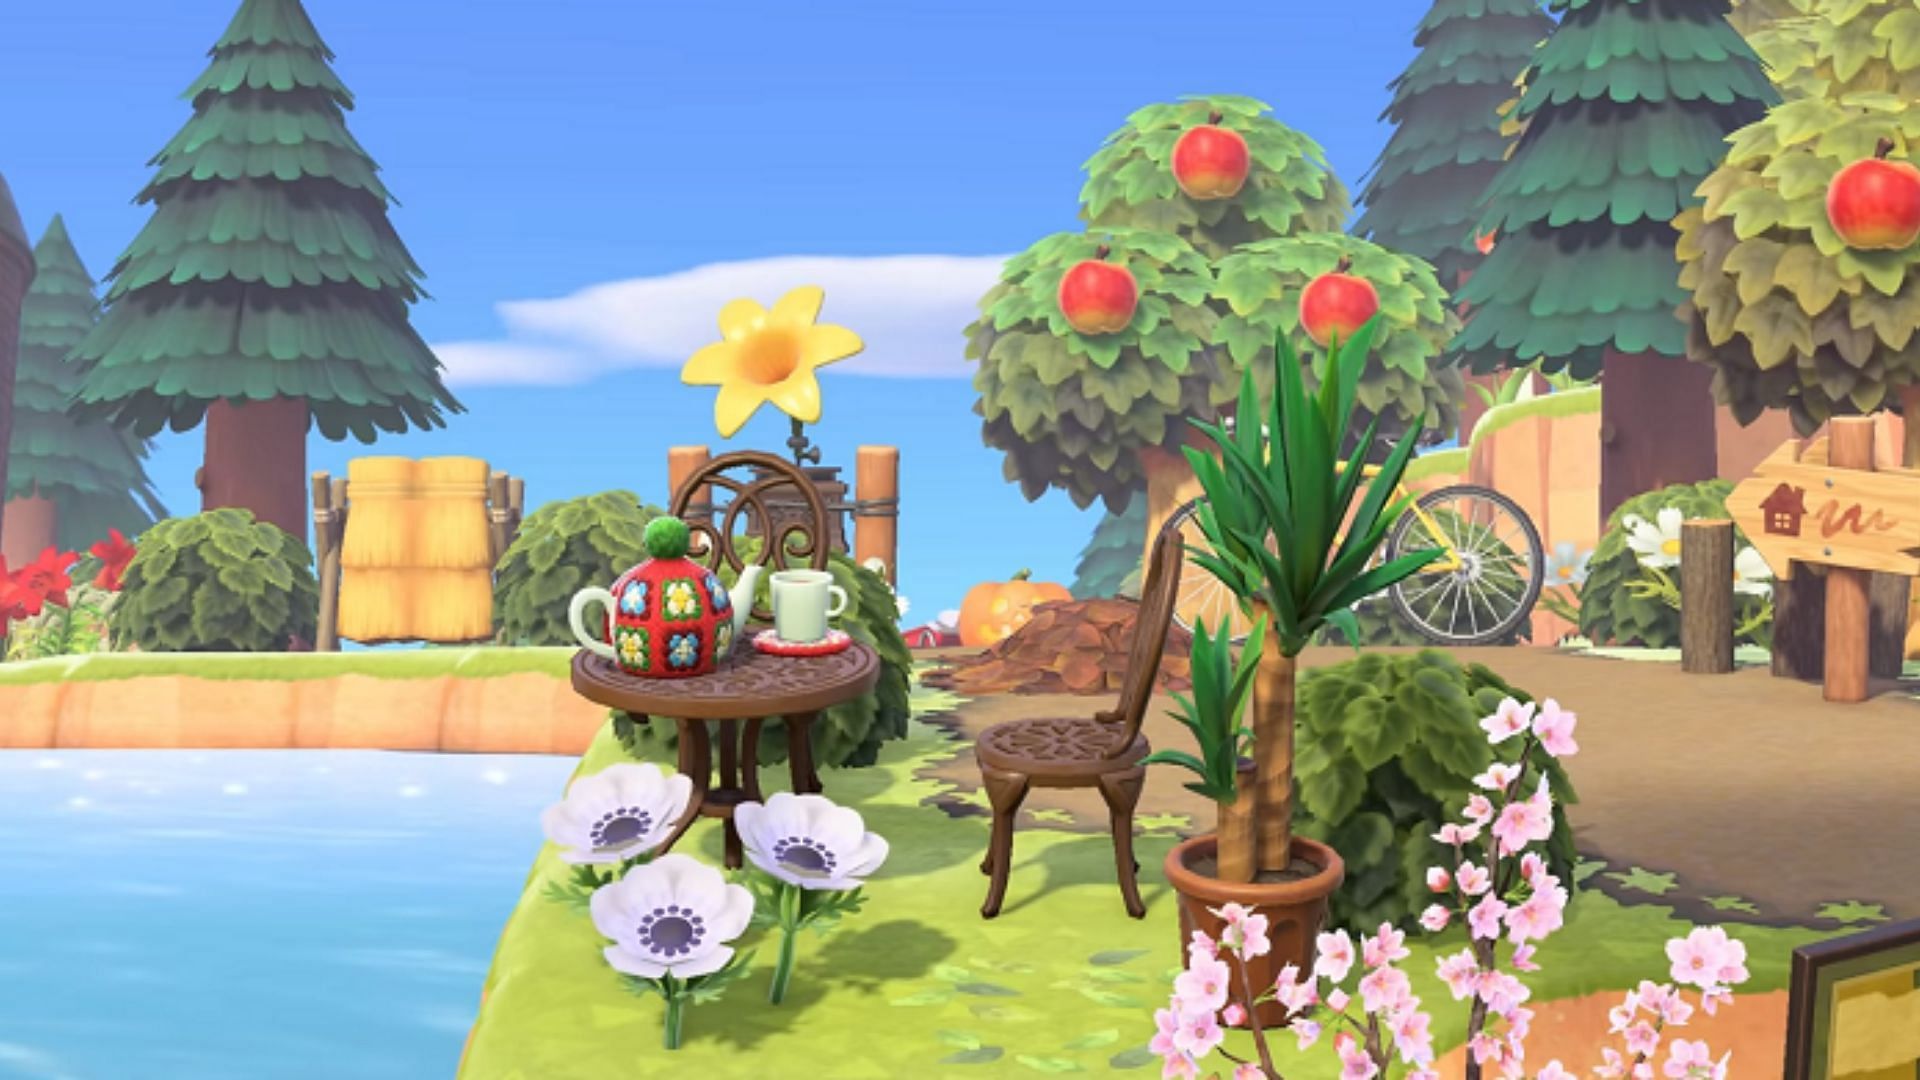 18 design ideas for small spaces in Animal Crossing New Horizons